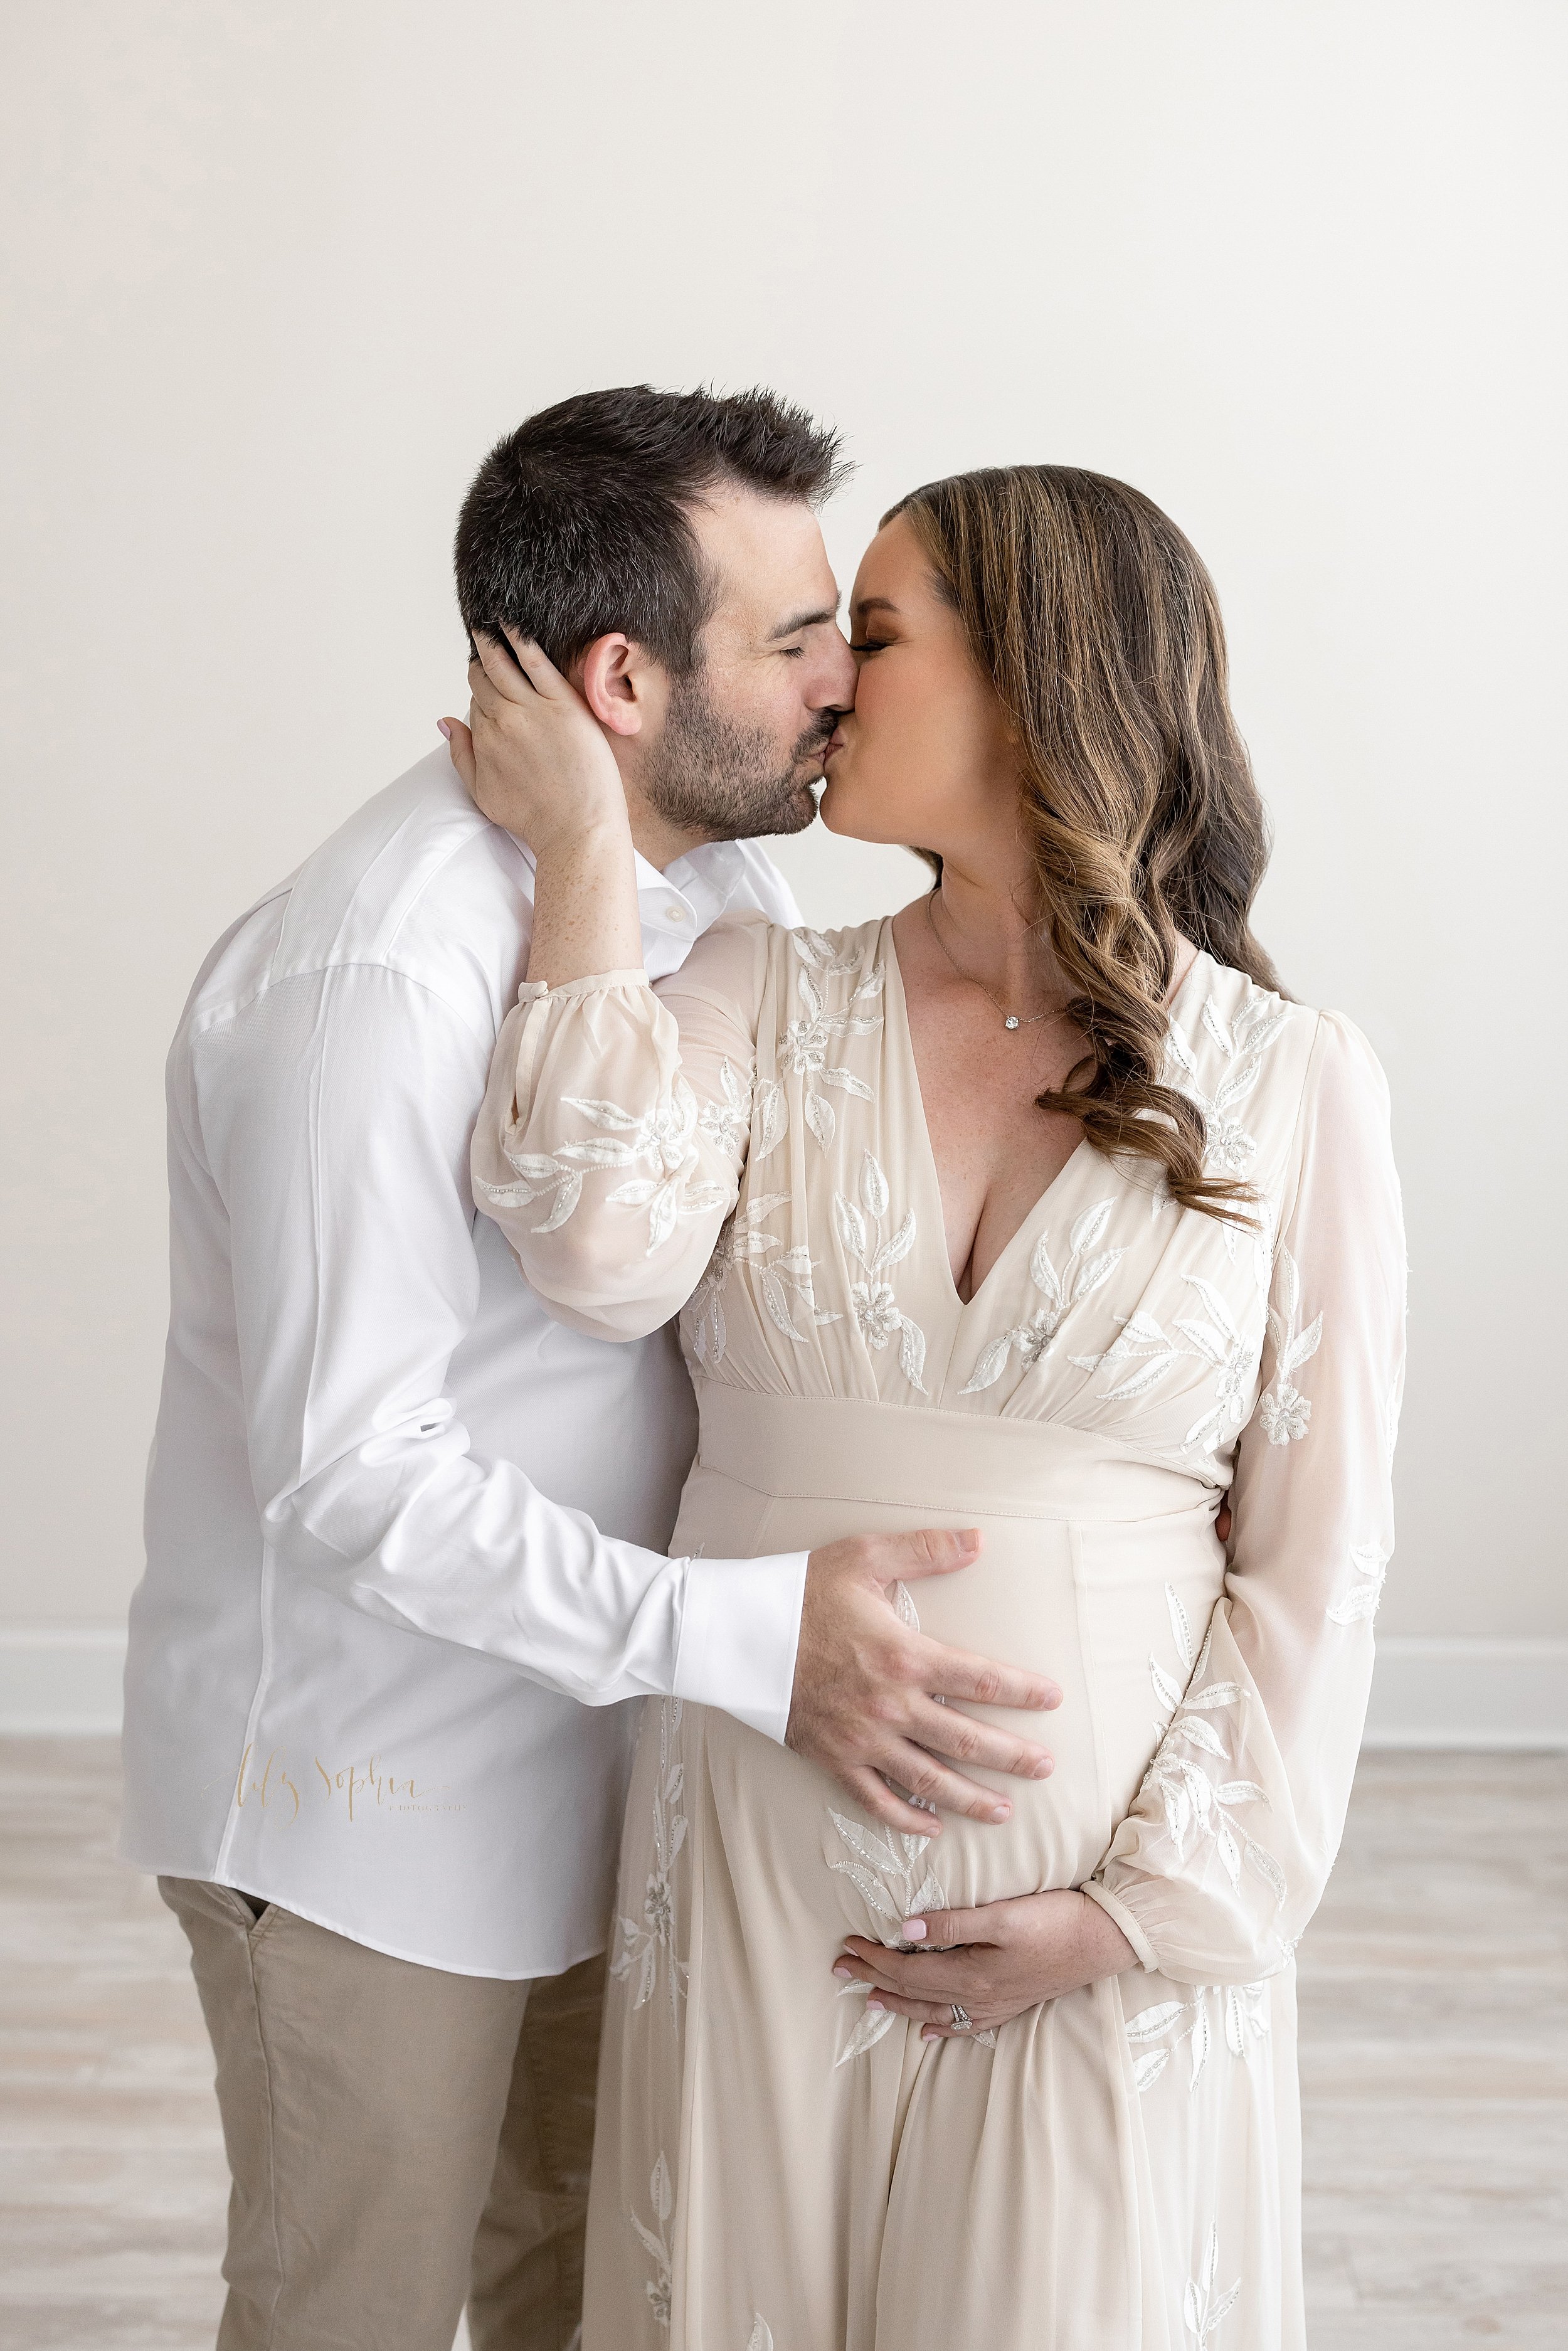  Maternity portrait of the love between husband and wife as they stand in a studio with the wife turning her head over her right shoulder and placing her right hand on her husband’s neck to kiss him while he places his right hand on their child in ut